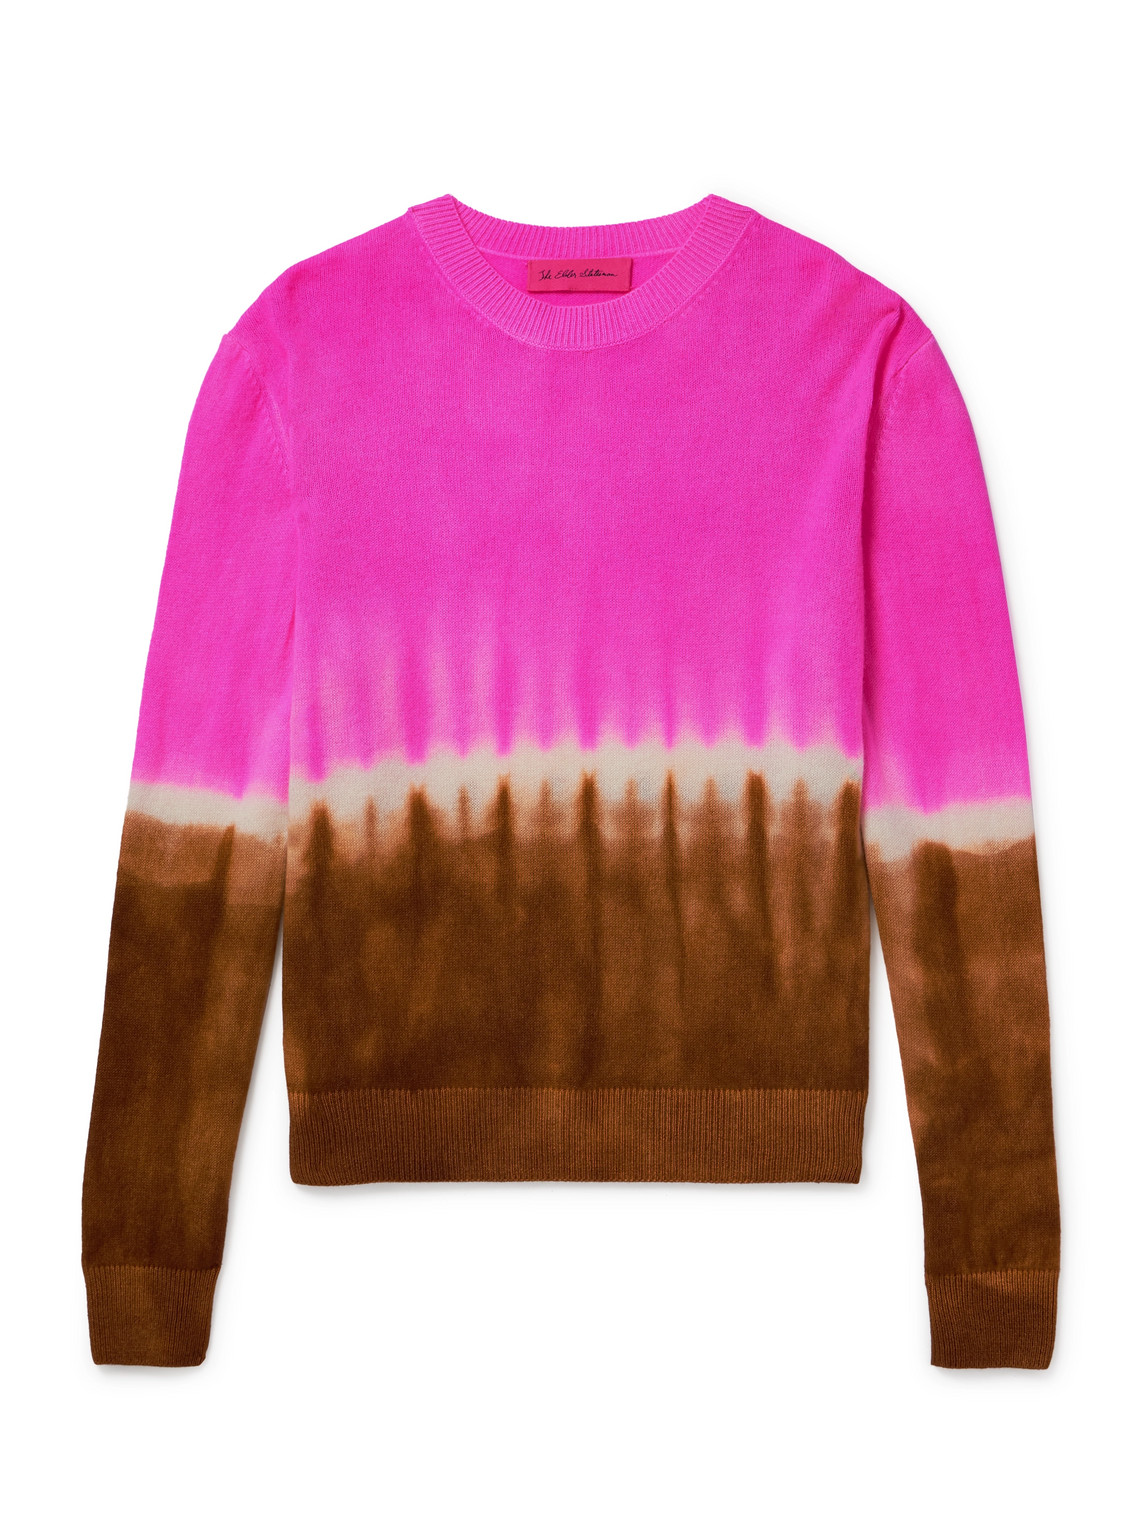 Tranquility Tie-Dyed Cashmere Sweater